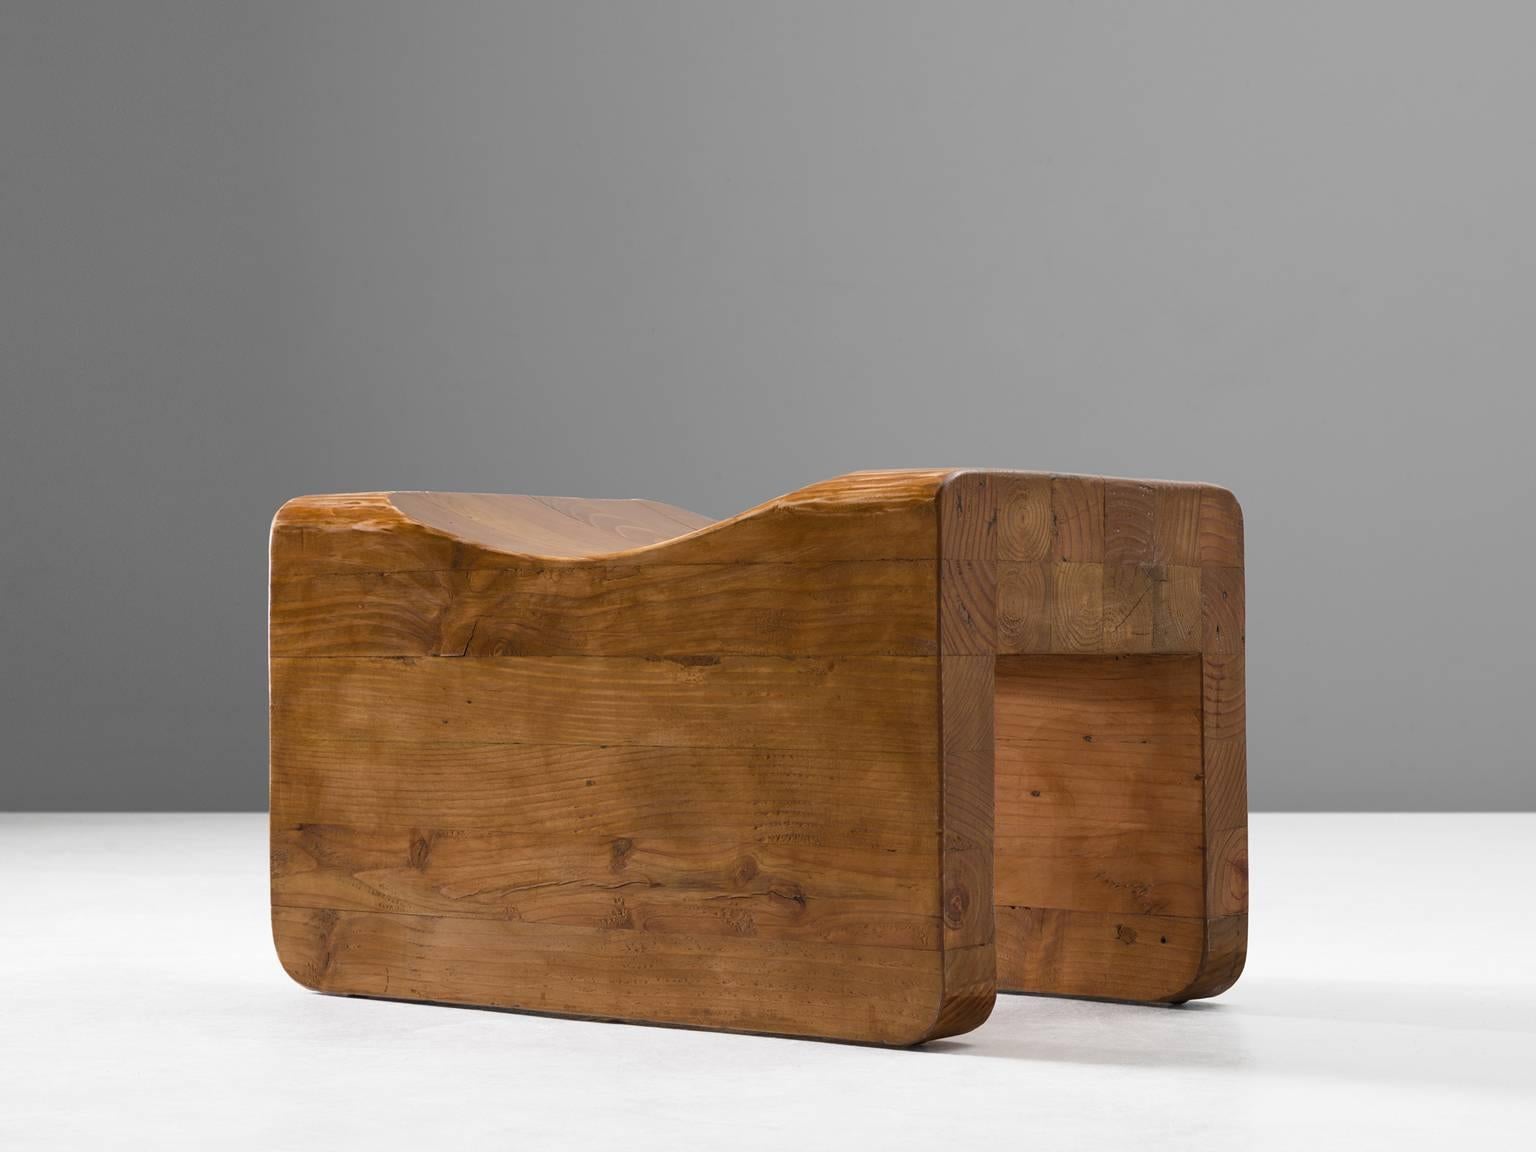 Stool 'UTO', in pine, by Axel Einar Hjort for Nordiksa Kompaniet, Sweden 1929-1932.

Early Uto stool in Northern European Pine by Axel Ejnar Hjort. This stool was part of the Sportsmobler series for Nordiska Kompaniet and was designed in the late